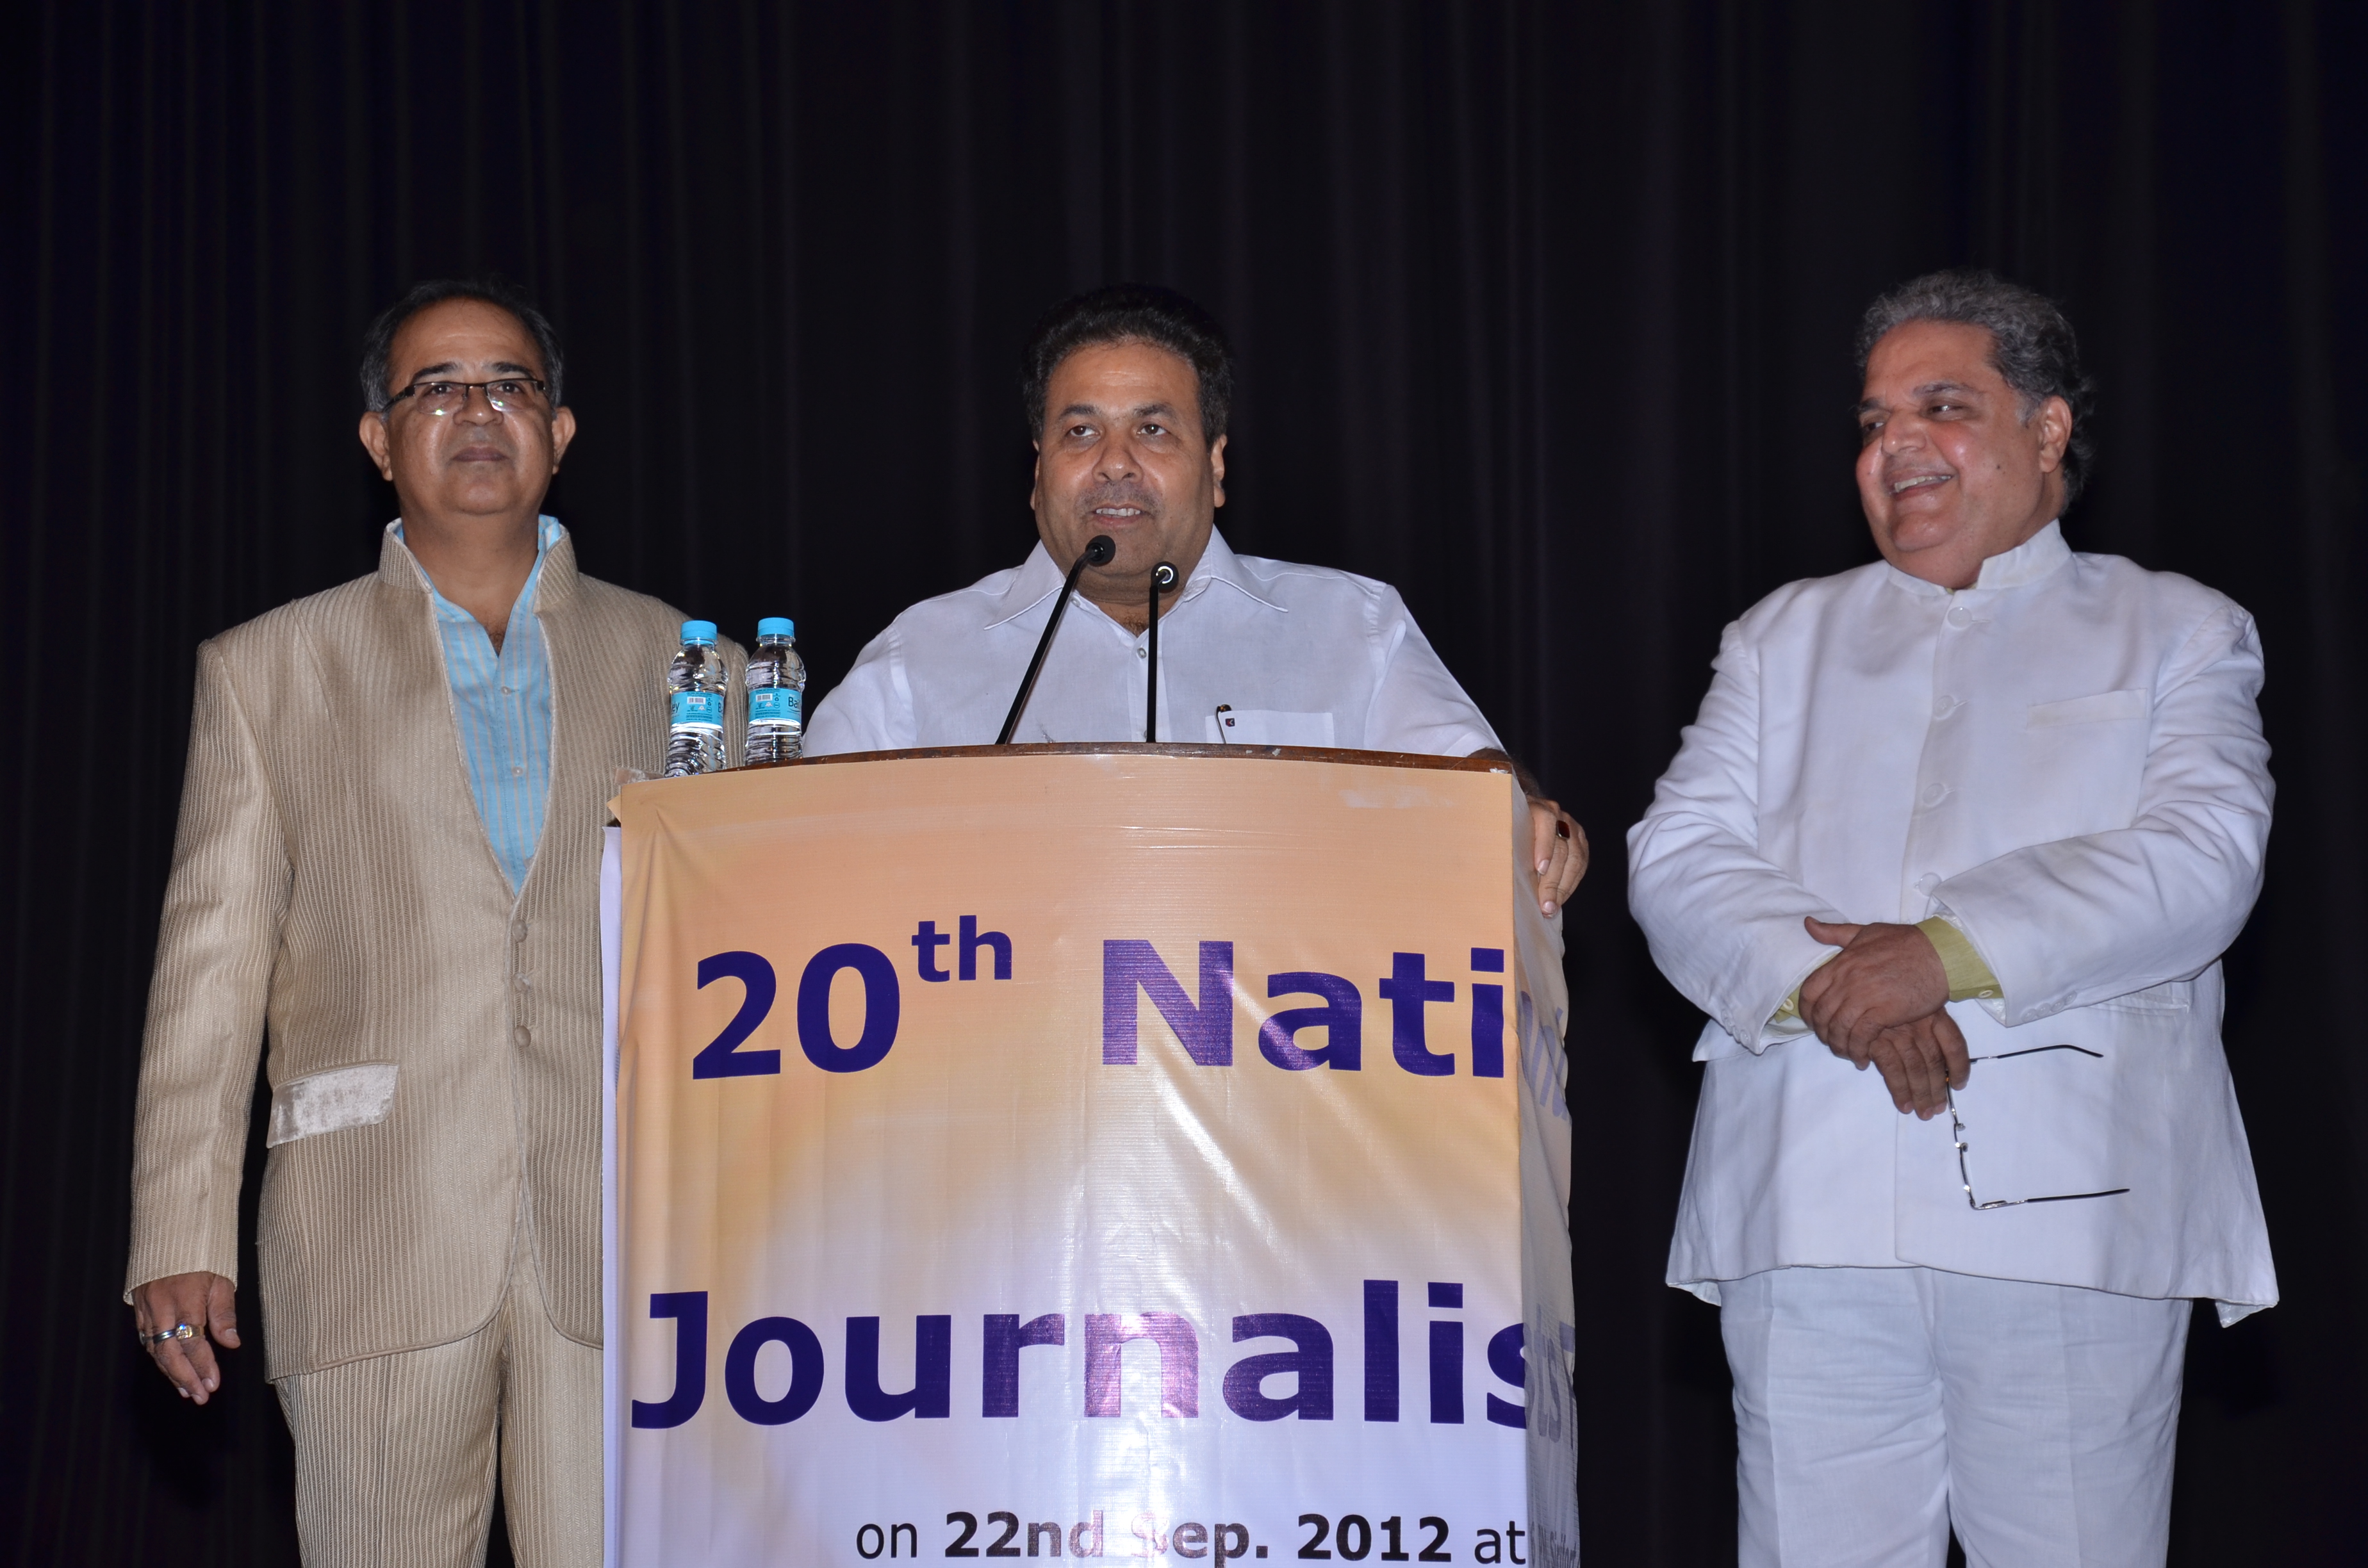  Journalist Association of India announced their Annual Awards: H K Sethi